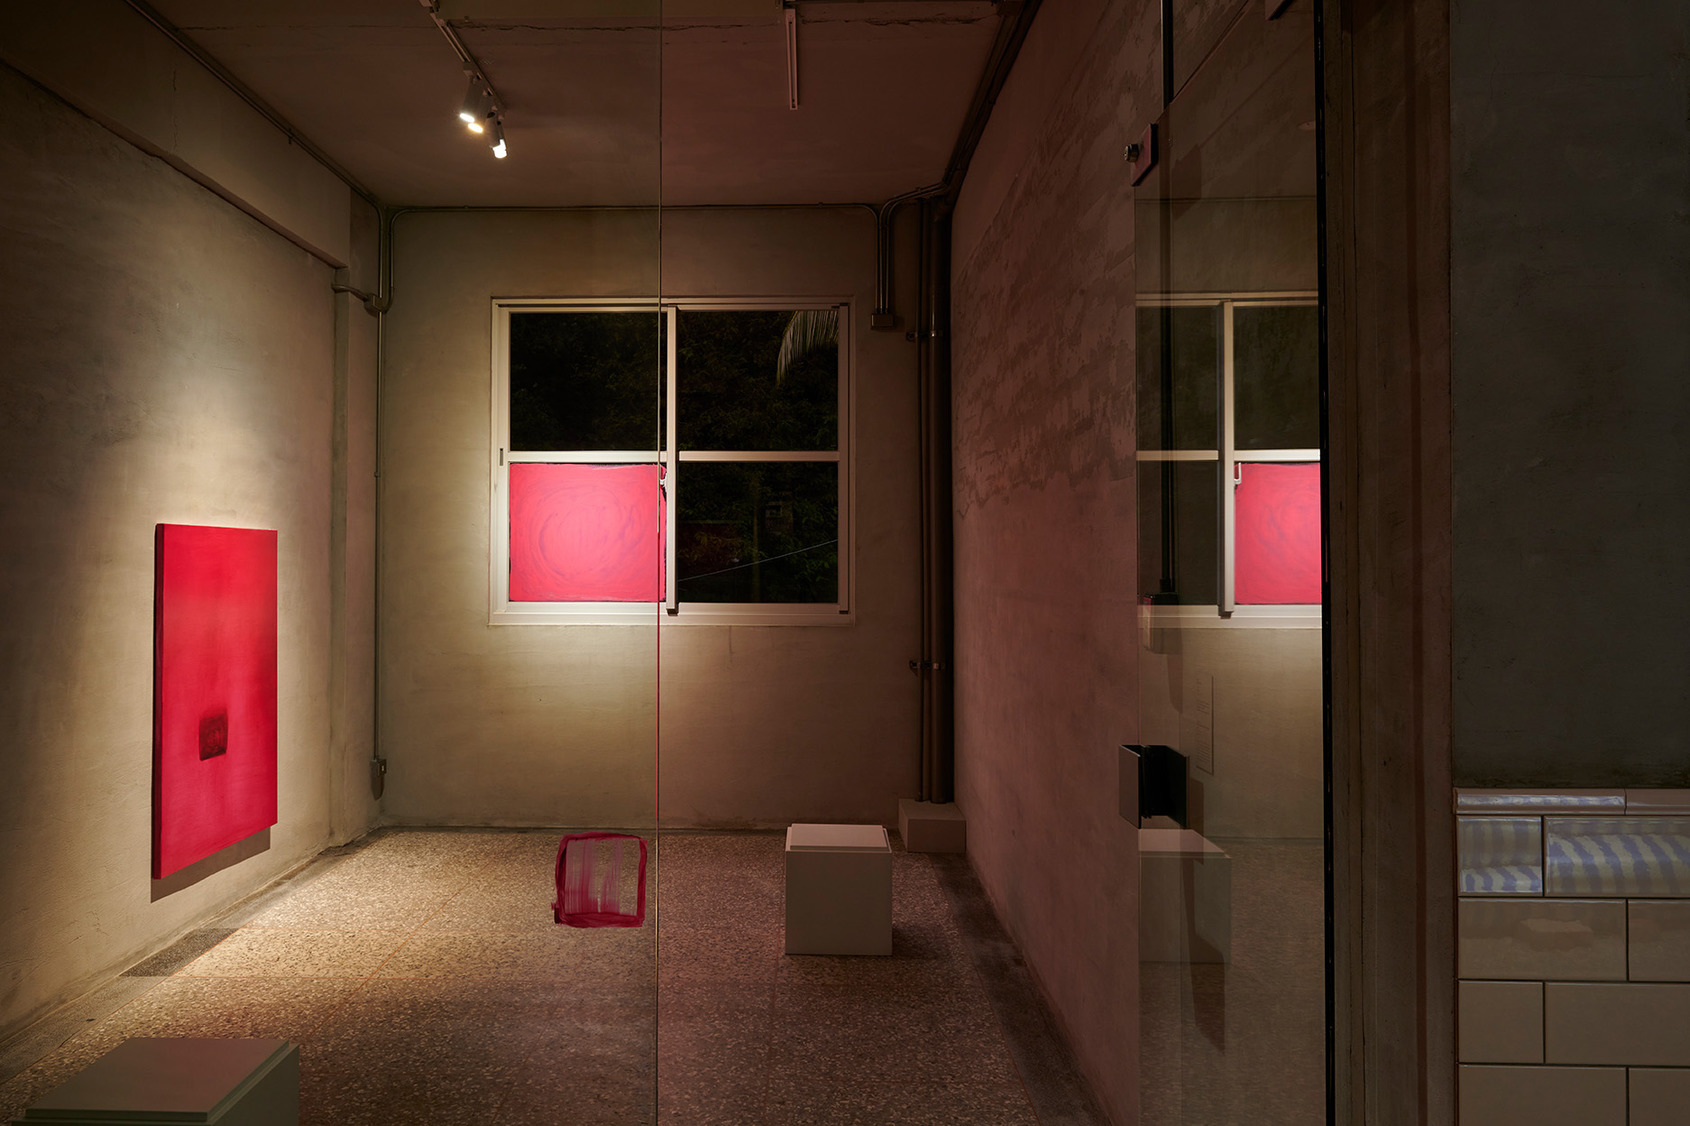 The installation view of Yaman Shao's The Place Where the Light Stays at ALIEN Art Centre © ALIEN Art Centre 